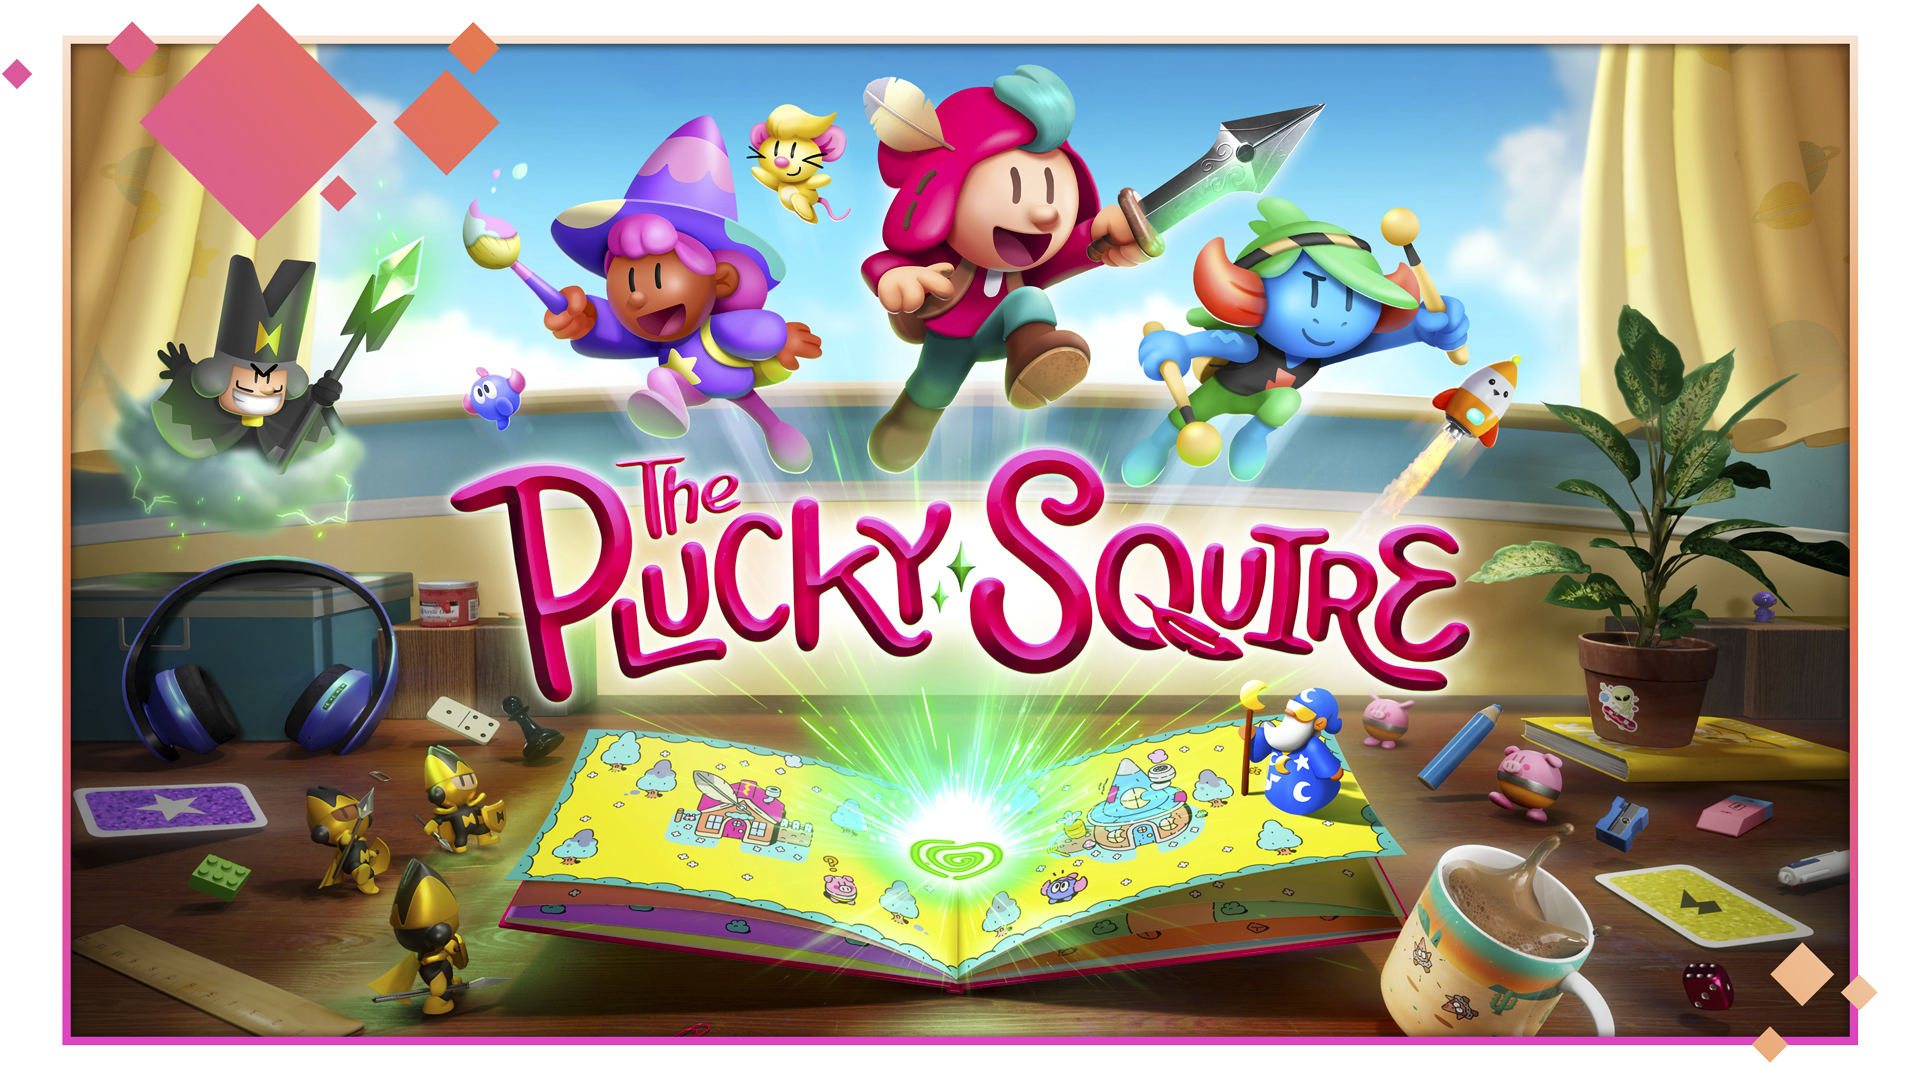 『The Plucky Squire』ゲームプレイトレイラー